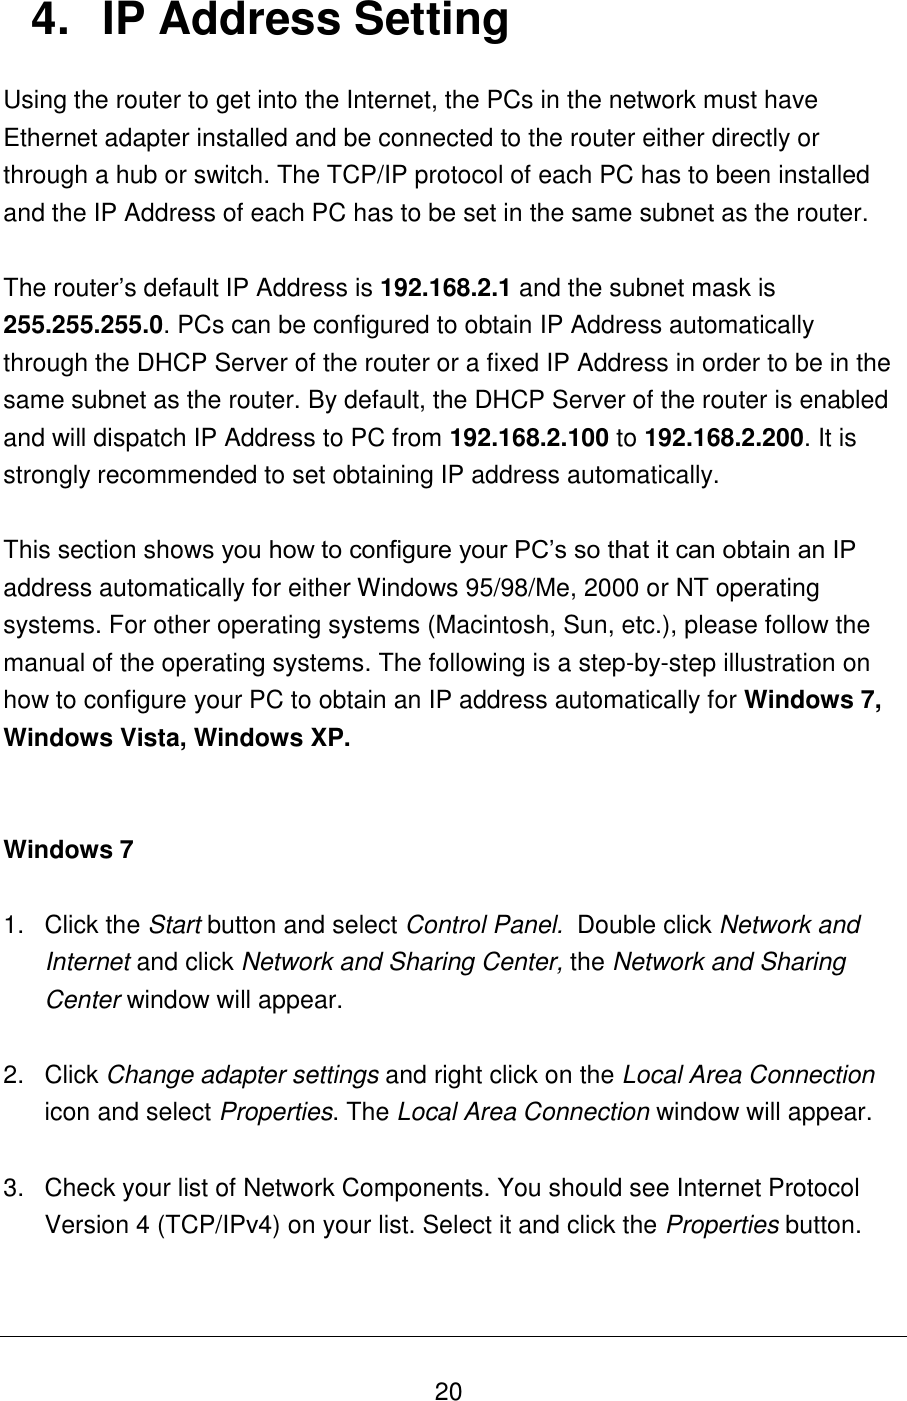   20 4.  IP Address Setting Using the router to get into the Internet, the PCs in the network must have Ethernet adapter installed and be connected to the router either directly or through a hub or switch. The TCP/IP protocol of each PC has to been installed and the IP Address of each PC has to be set in the same subnet as the router.  The router’s default IP Address is 192.168.2.1 and the subnet mask is 255.255.255.0. PCs can be configured to obtain IP Address automatically through the DHCP Server of the router or a fixed IP Address in order to be in the same subnet as the router. By default, the DHCP Server of the router is enabled and will dispatch IP Address to PC from 192.168.2.100 to 192.168.2.200. It is strongly recommended to set obtaining IP address automatically.  This section shows you how to configure your PC’s so that it can obtain an IP address automatically for either Windows 95/98/Me, 2000 or NT operating systems. For other operating systems (Macintosh, Sun, etc.), please follow the manual of the operating systems. The following is a step-by-step illustration on how to configure your PC to obtain an IP address automatically for Windows 7, Windows Vista, Windows XP.   Windows 7  1.  Click the Start button and select Control Panel.  Double click Network and Internet and click Network and Sharing Center, the Network and Sharing Center window will appear.  2.  Click Change adapter settings and right click on the Local Area Connection icon and select Properties. The Local Area Connection window will appear.  3.  Check your list of Network Components. You should see Internet Protocol Version 4 (TCP/IPv4) on your list. Select it and click the Properties button.  